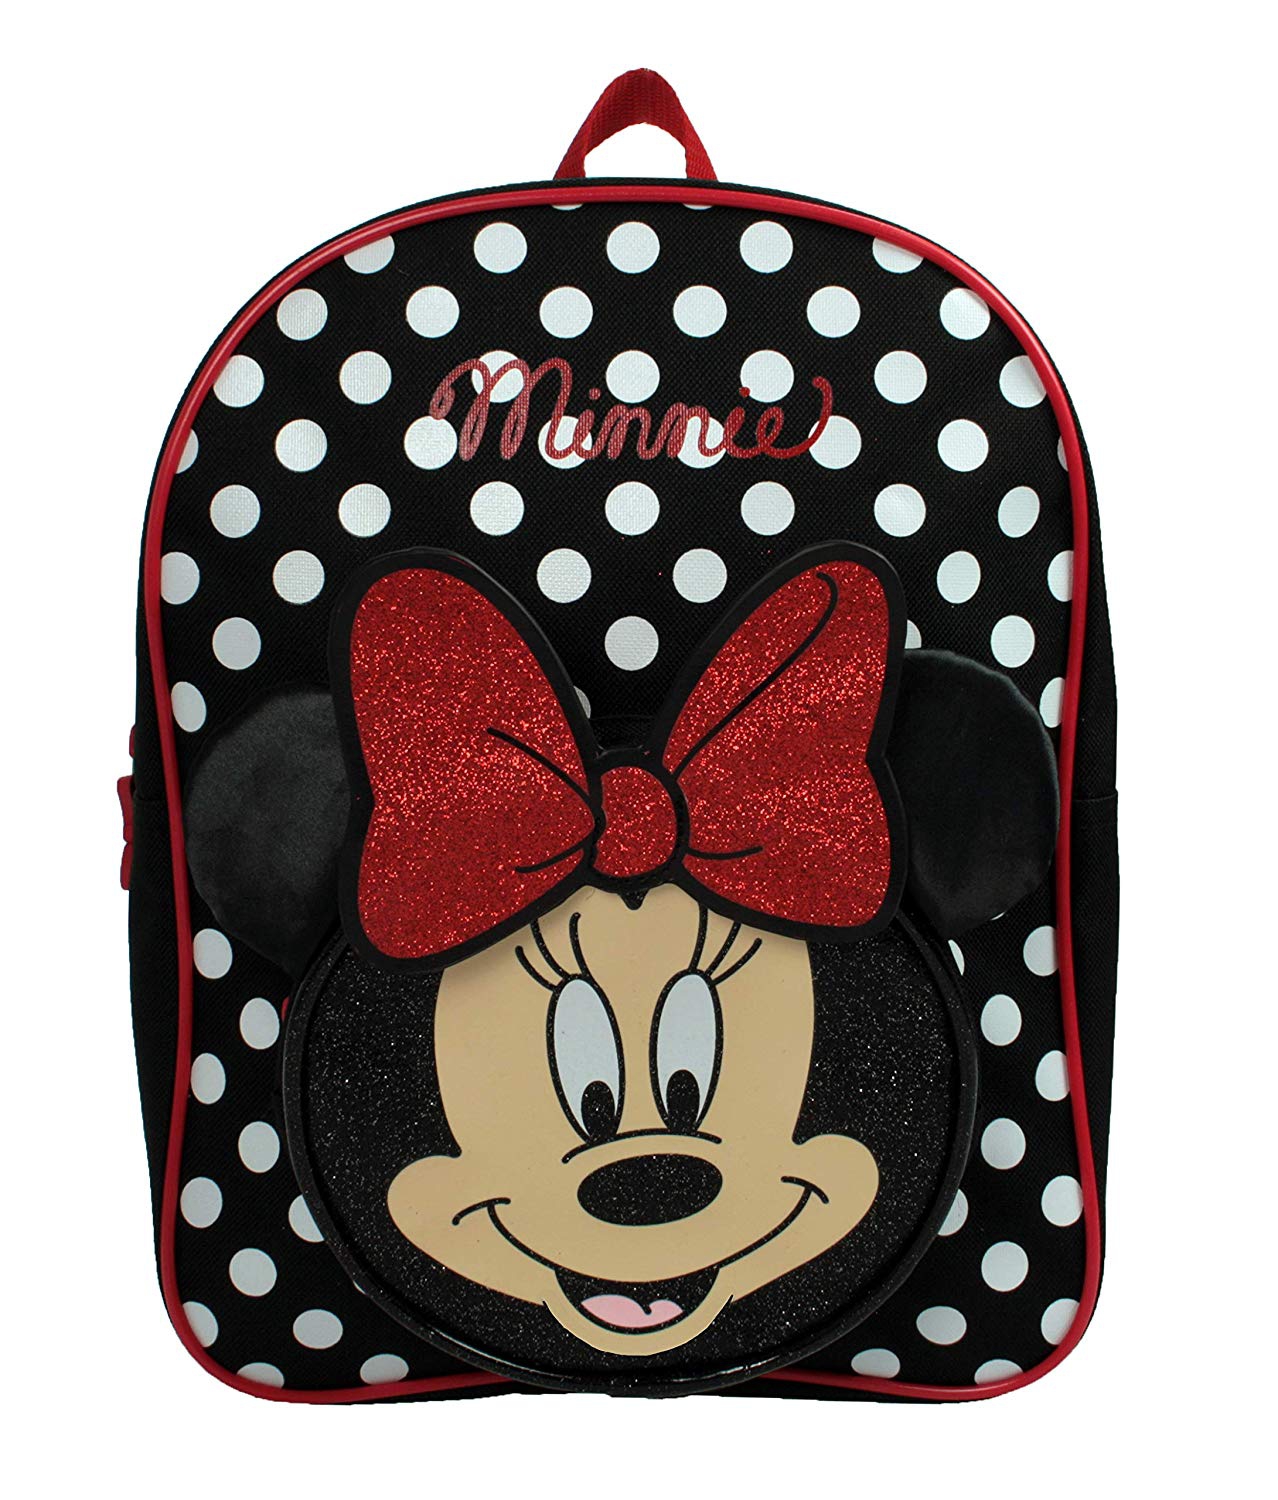 Minnie Mouse Girls Red 3d Bow and Ears School Bag Rucksack Backpack